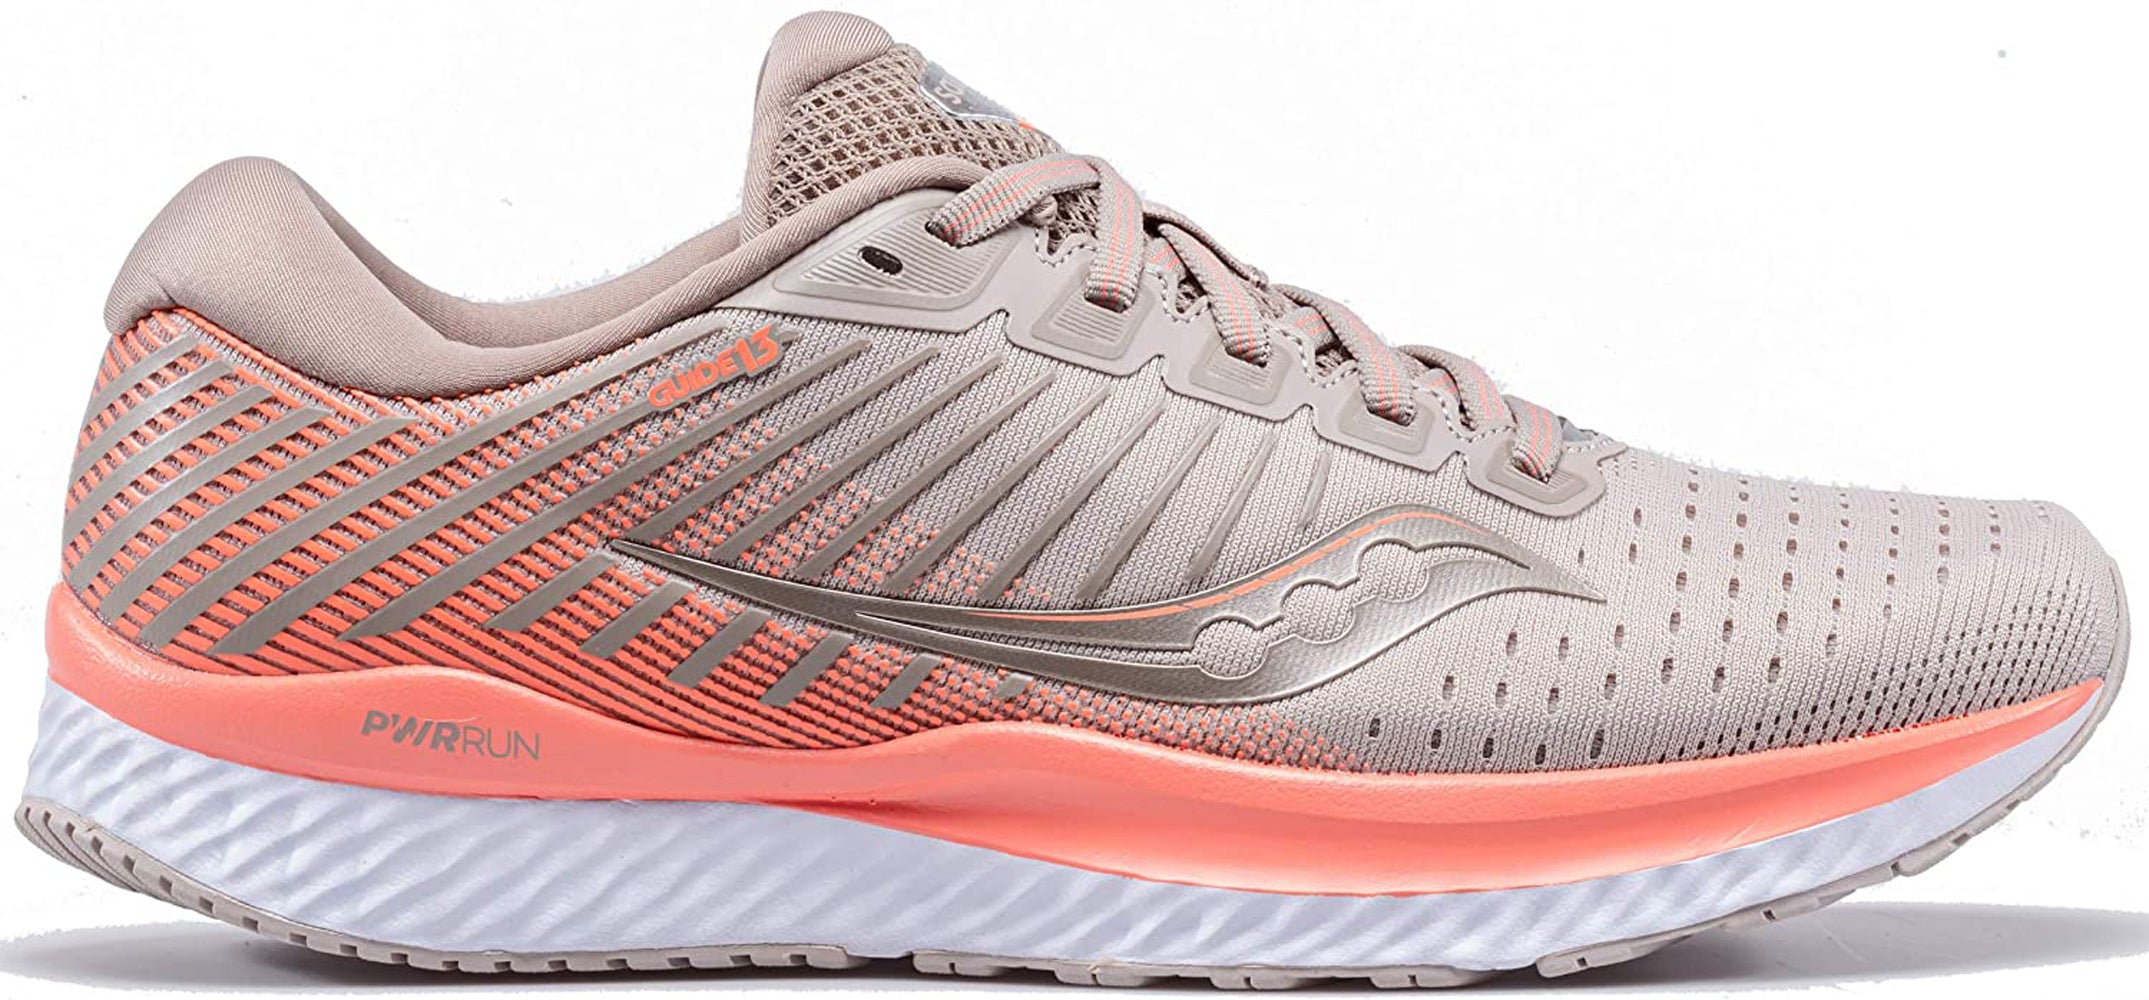 Saucony Women's Guide 13 Running Shoe in Moonrock Coral Side Angle View